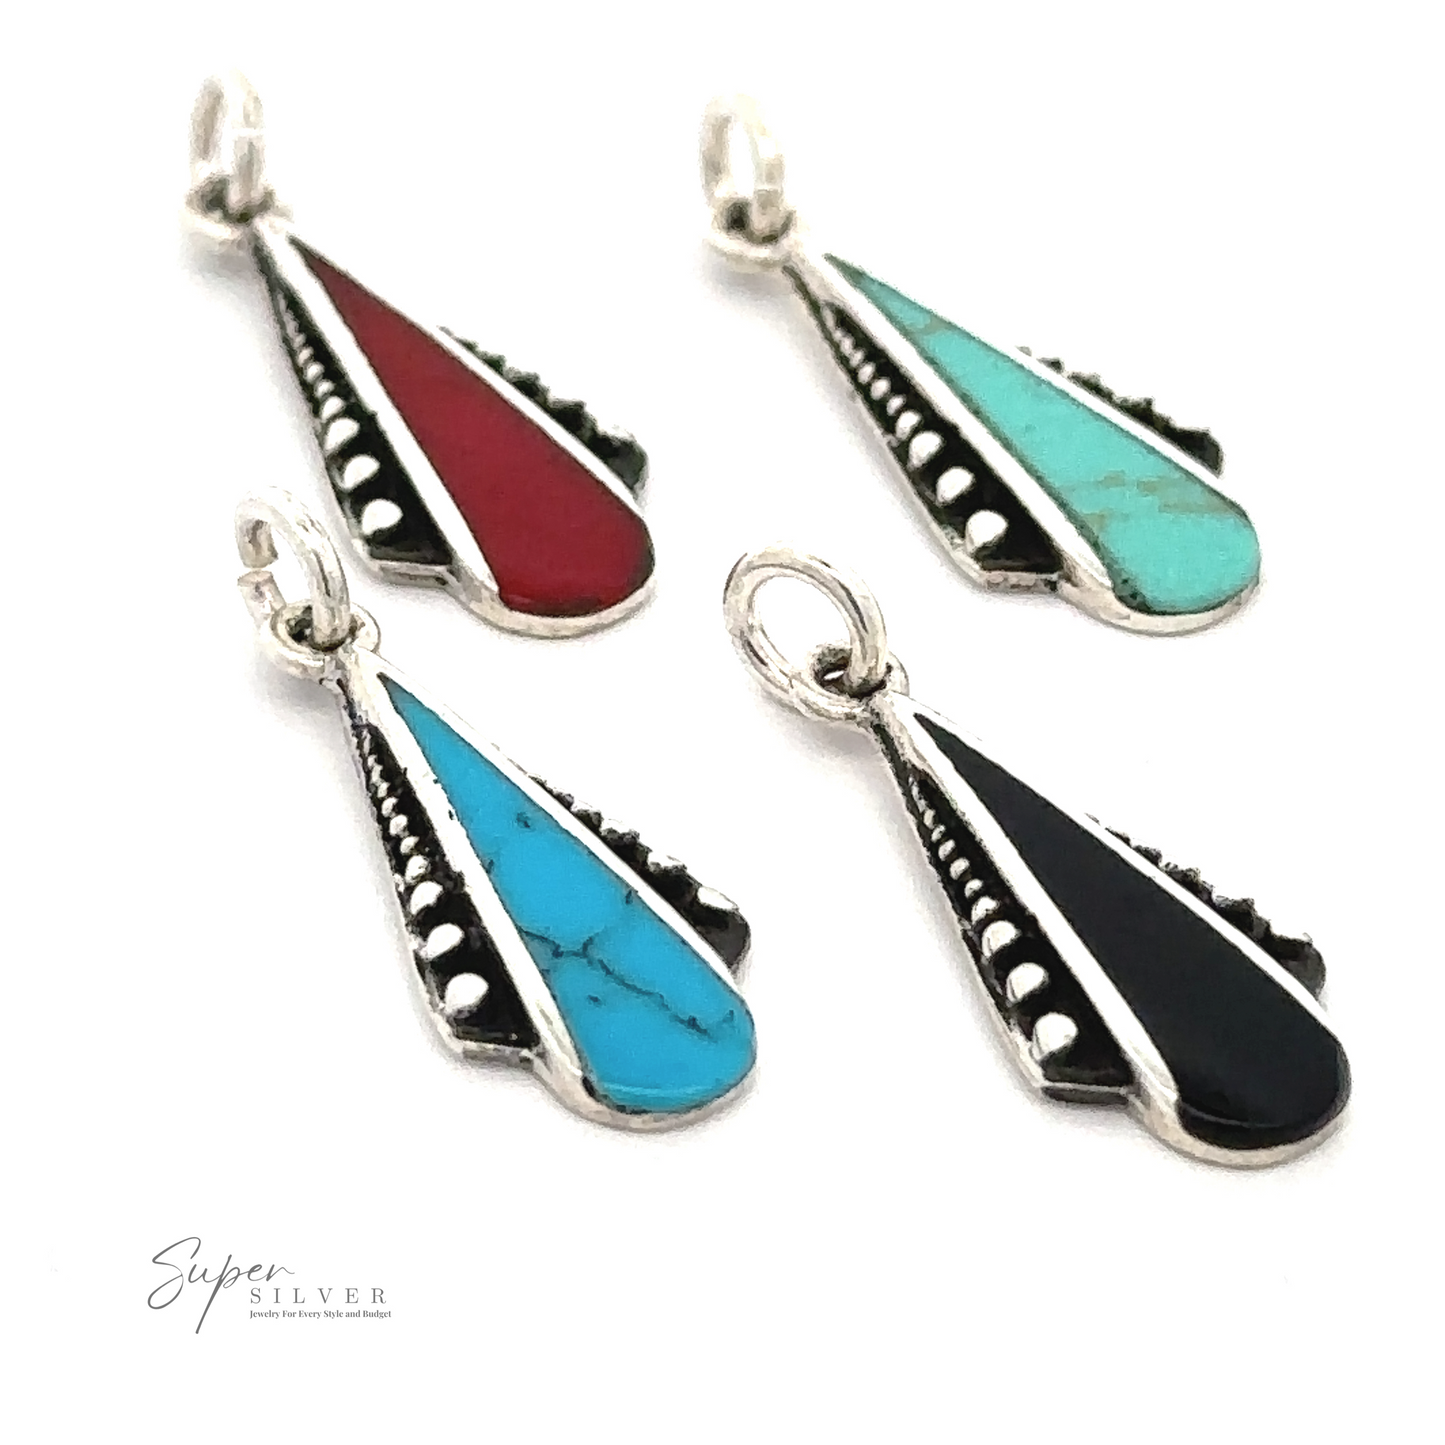 Four stunning Teardrop Pendants with Inlaid Stones and Ball Border featuring inlaid stones in red, turquoise, blue, and black, all beautifully accented with sterling silver.